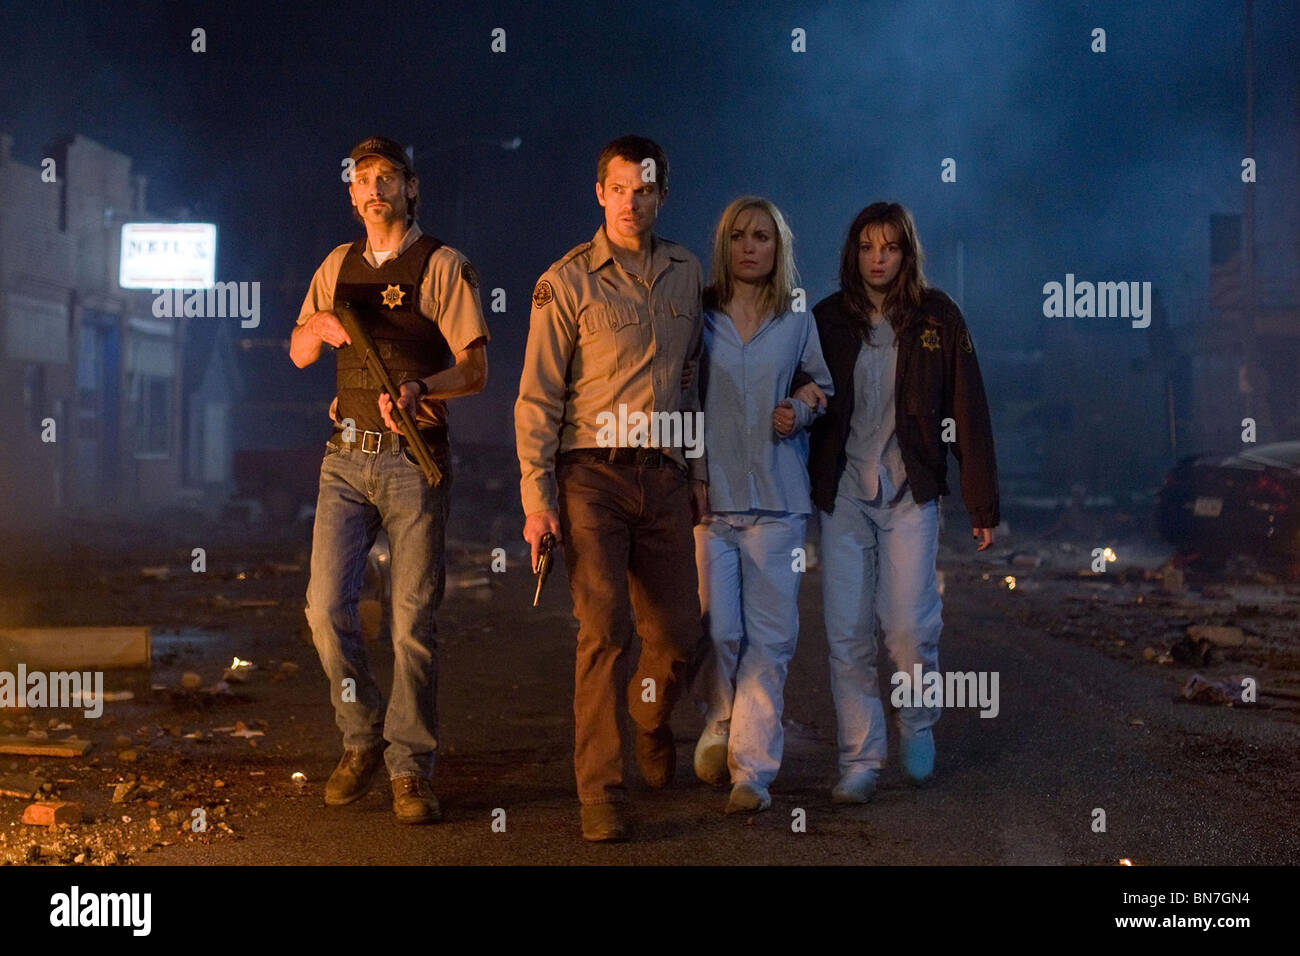 THE CRAZIES (2010) TIMOTHY OLYPHANT, RADHA MITCHELL, DANIELLE PANABAKER, JOE ANDERSON BRECK EISNER (DIR) Stock Photo